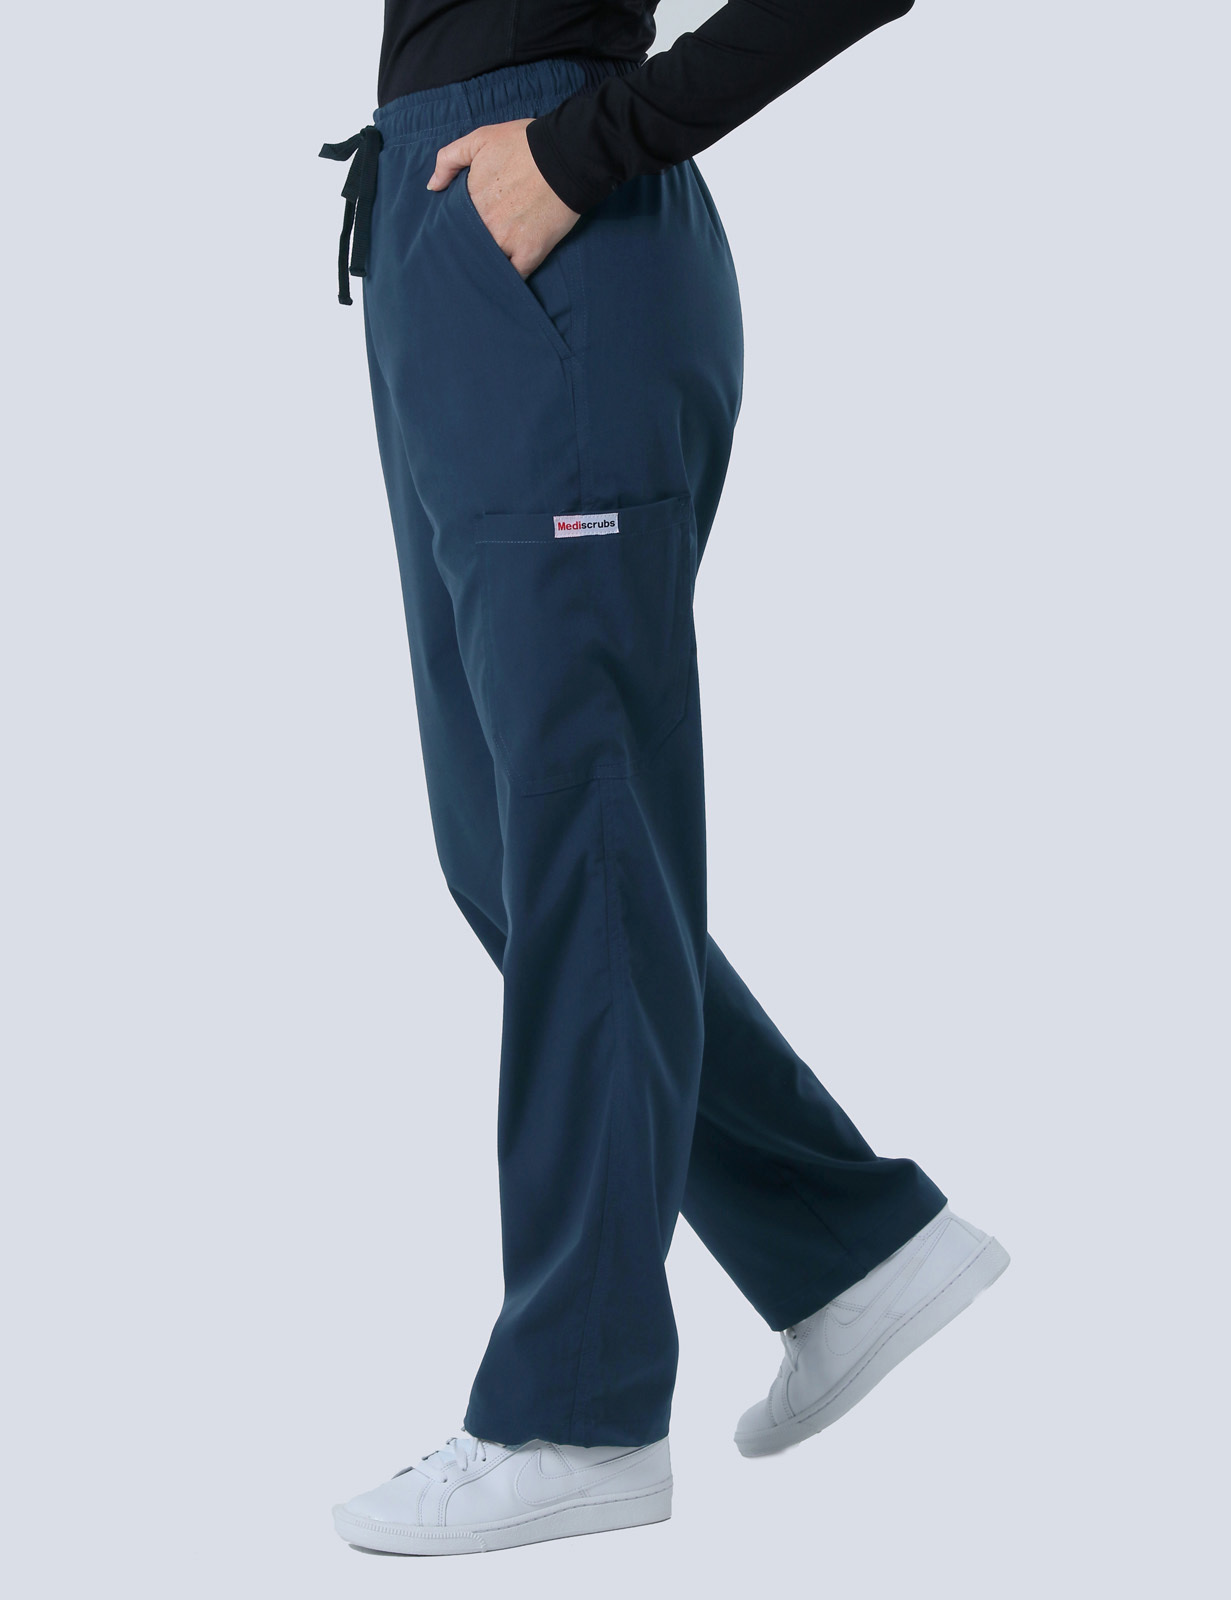 Hopevale Primary Health - CN (Women's Fit Solid Scrub Top and Cargo Pants in Navy incl Logos)